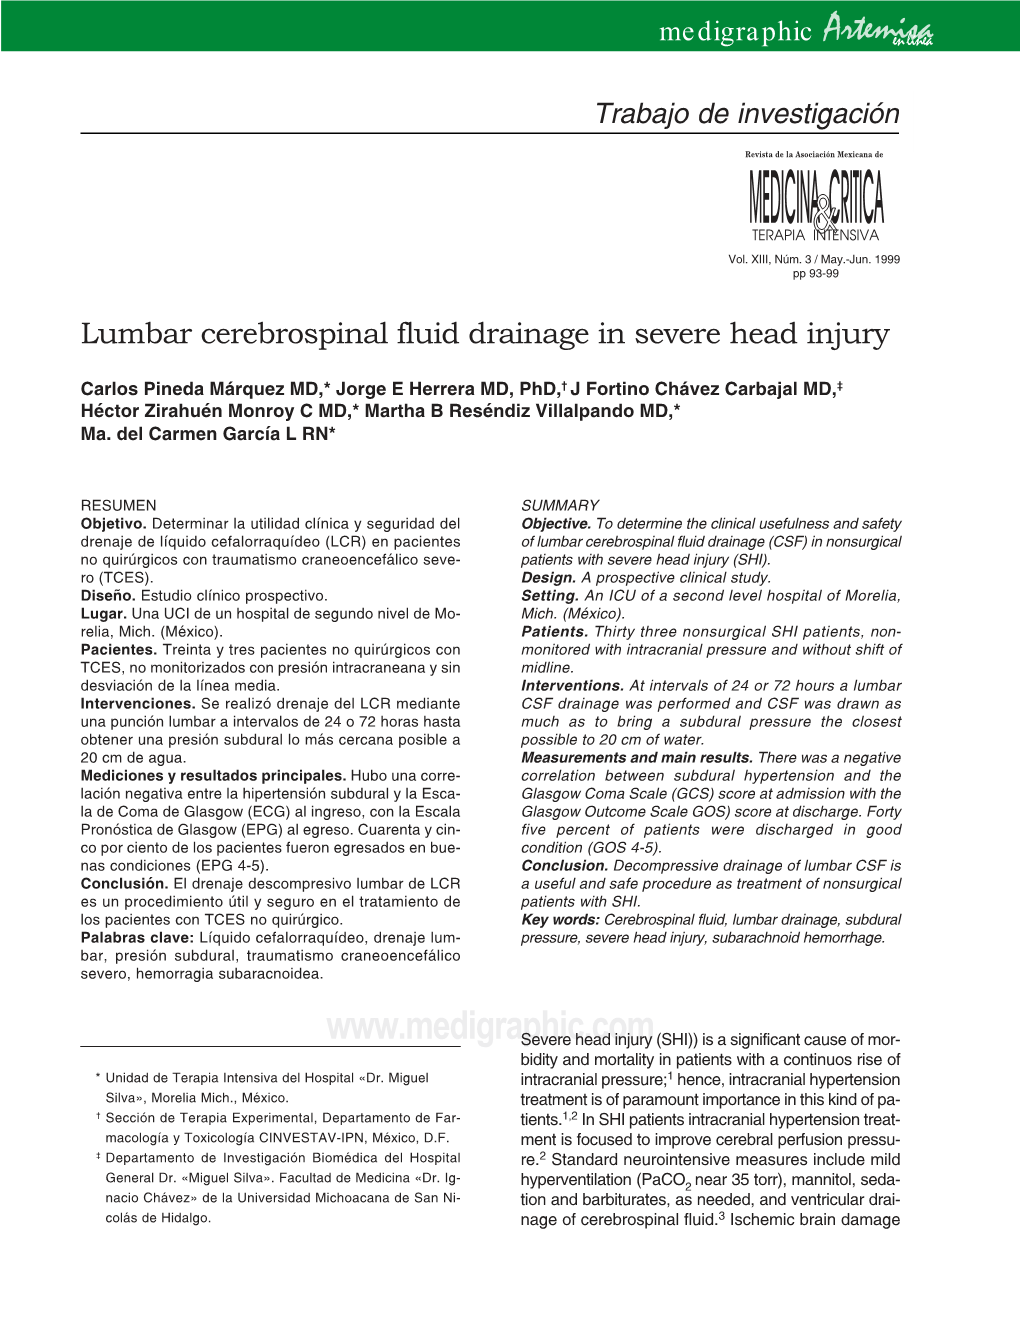 Lumbar Cerebrospinal Fluid Drainage in Severe Head Injury